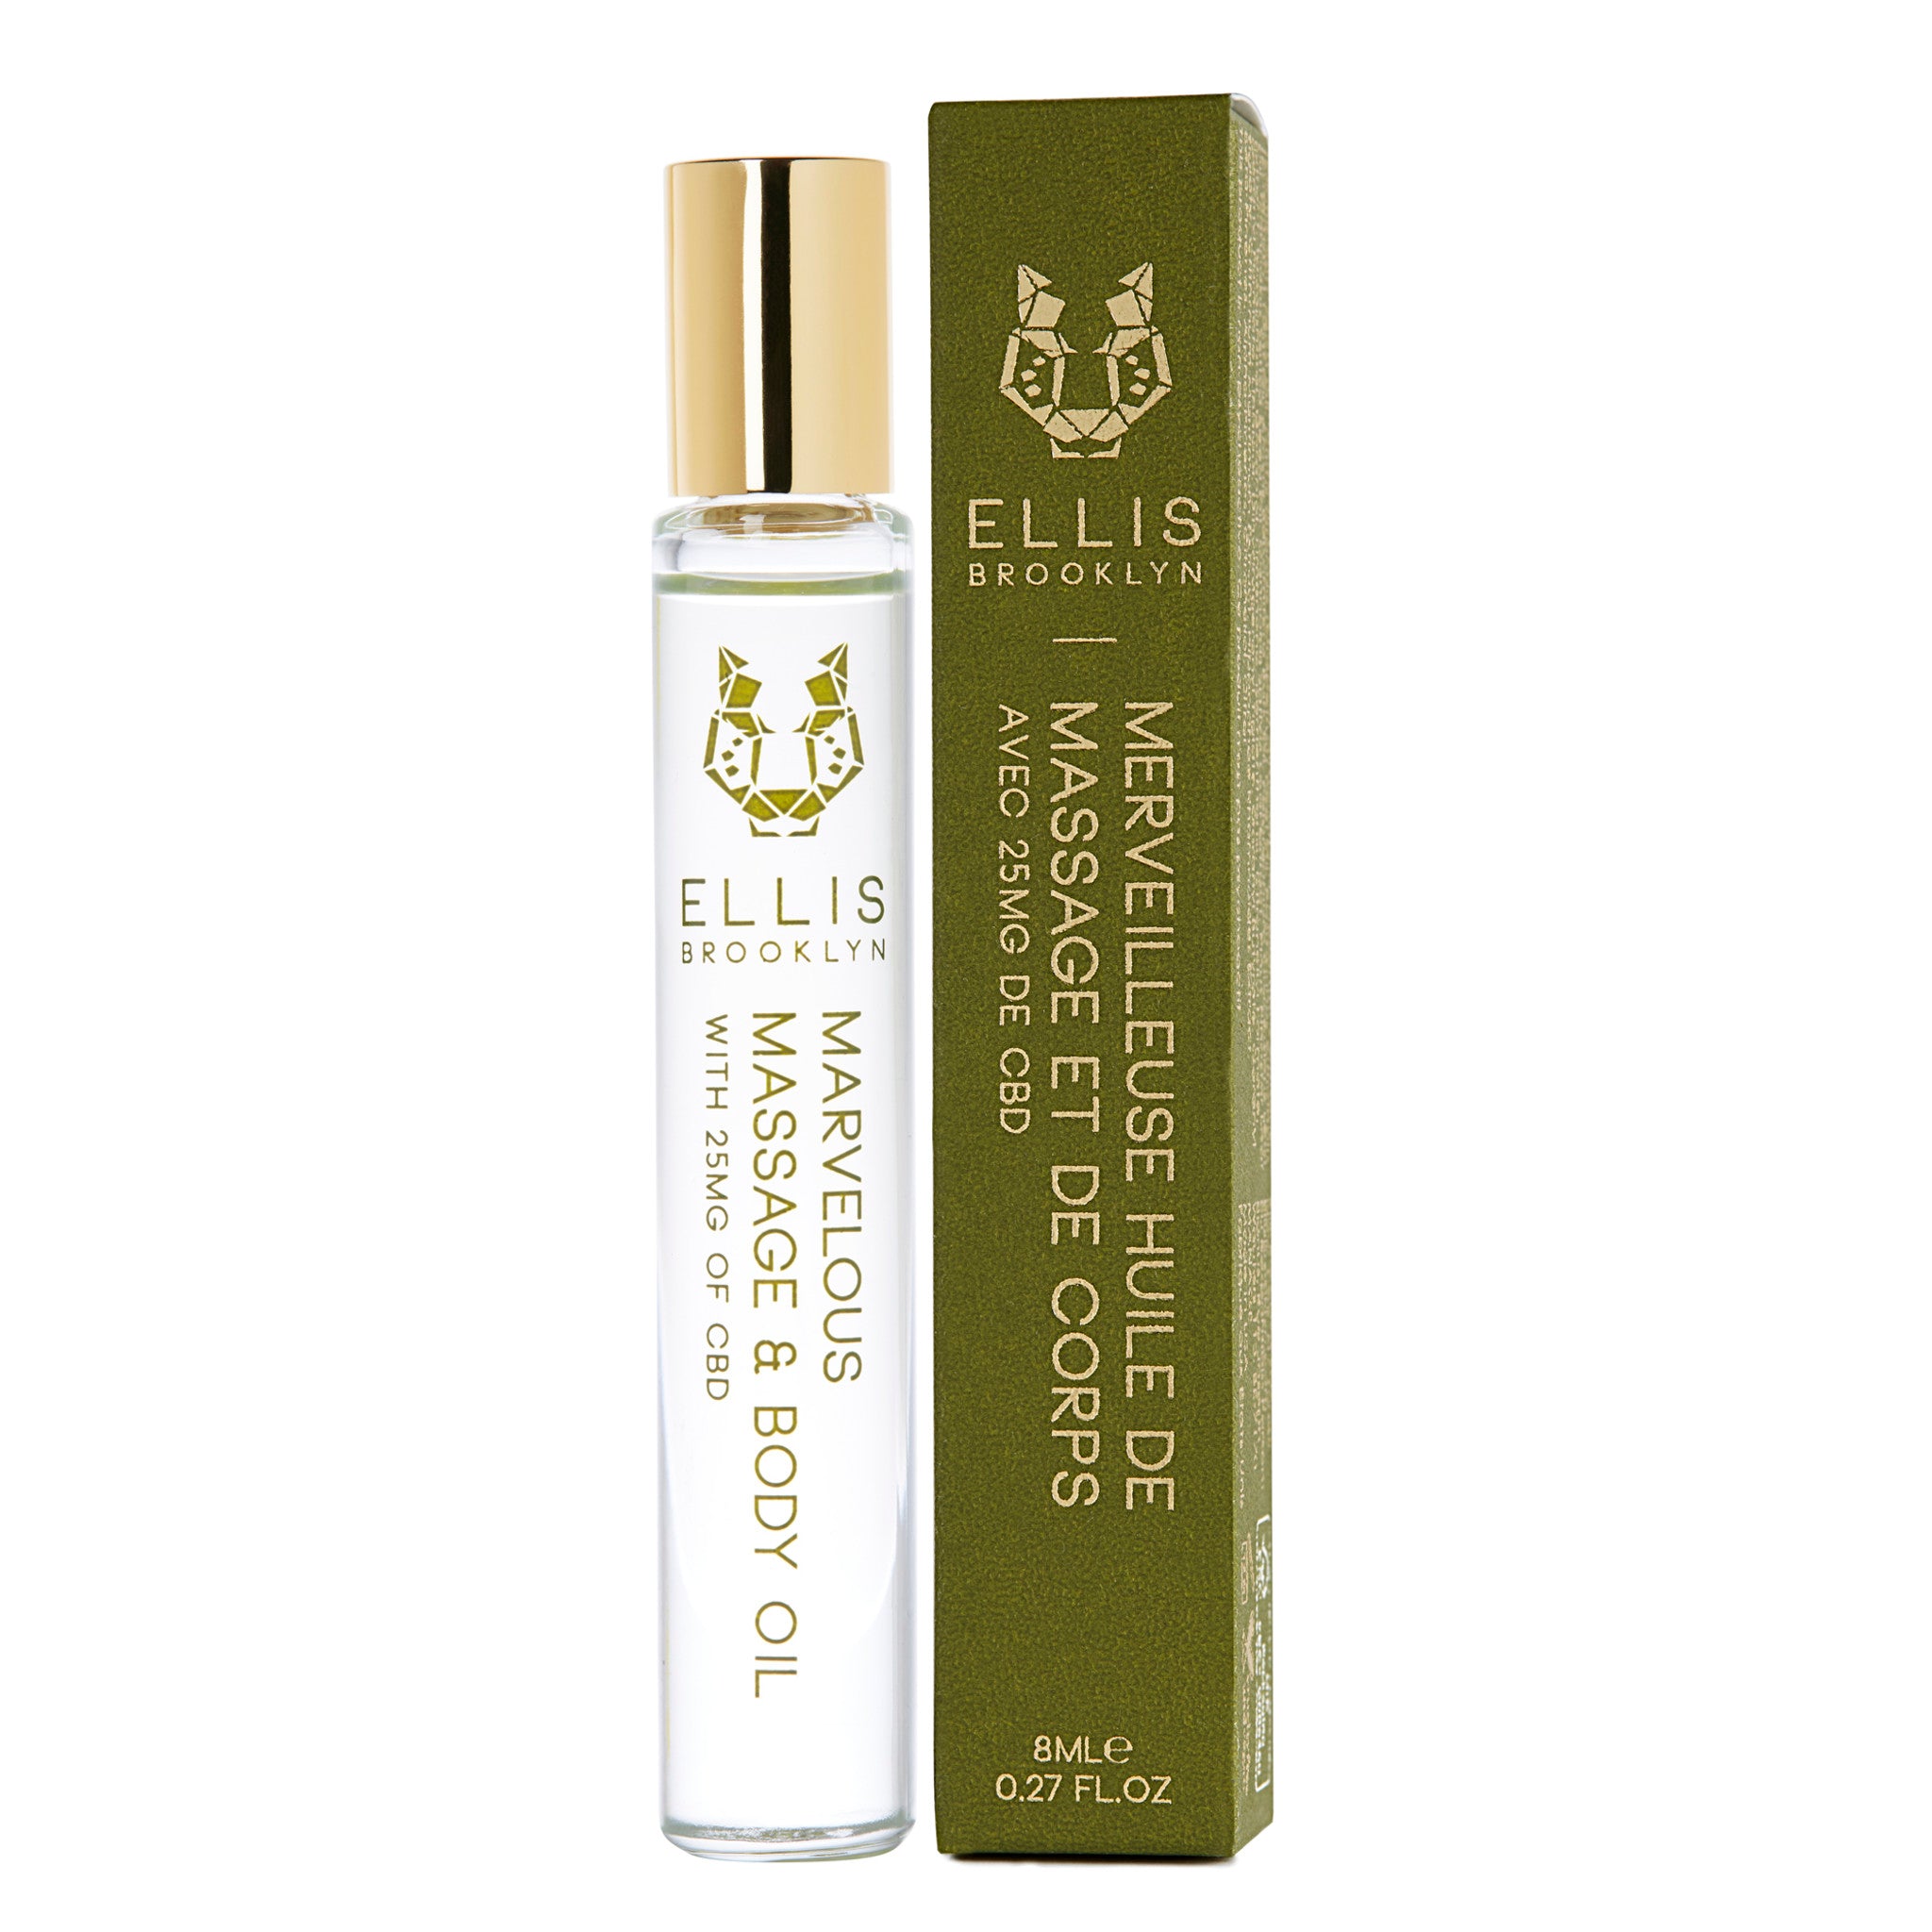 Ellis Brooklyn Marvelous Massage and Body Oil With 100mg of Full Spectrum CBD Size variant: .27 fl oz | 8 ml main image.